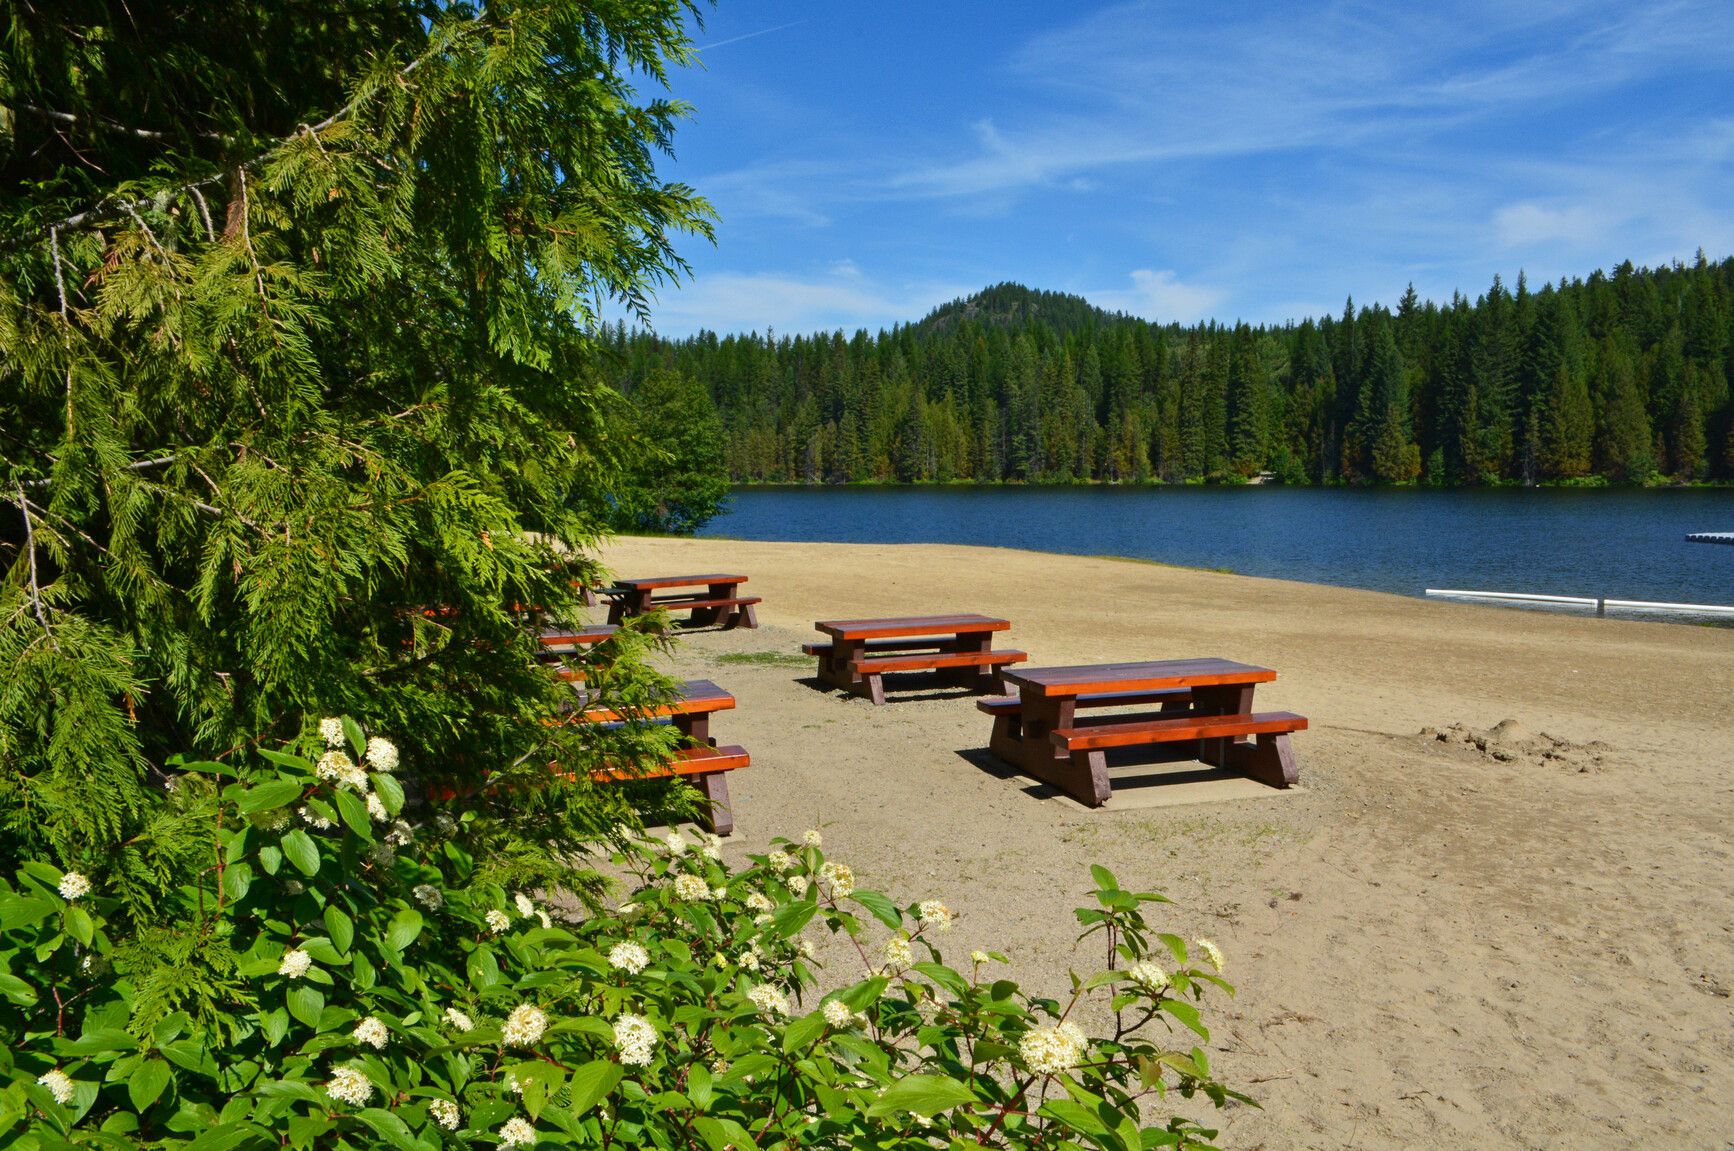 Beach and picnic area at Third lake a great place for summertime fun. Champion Lakes Park.